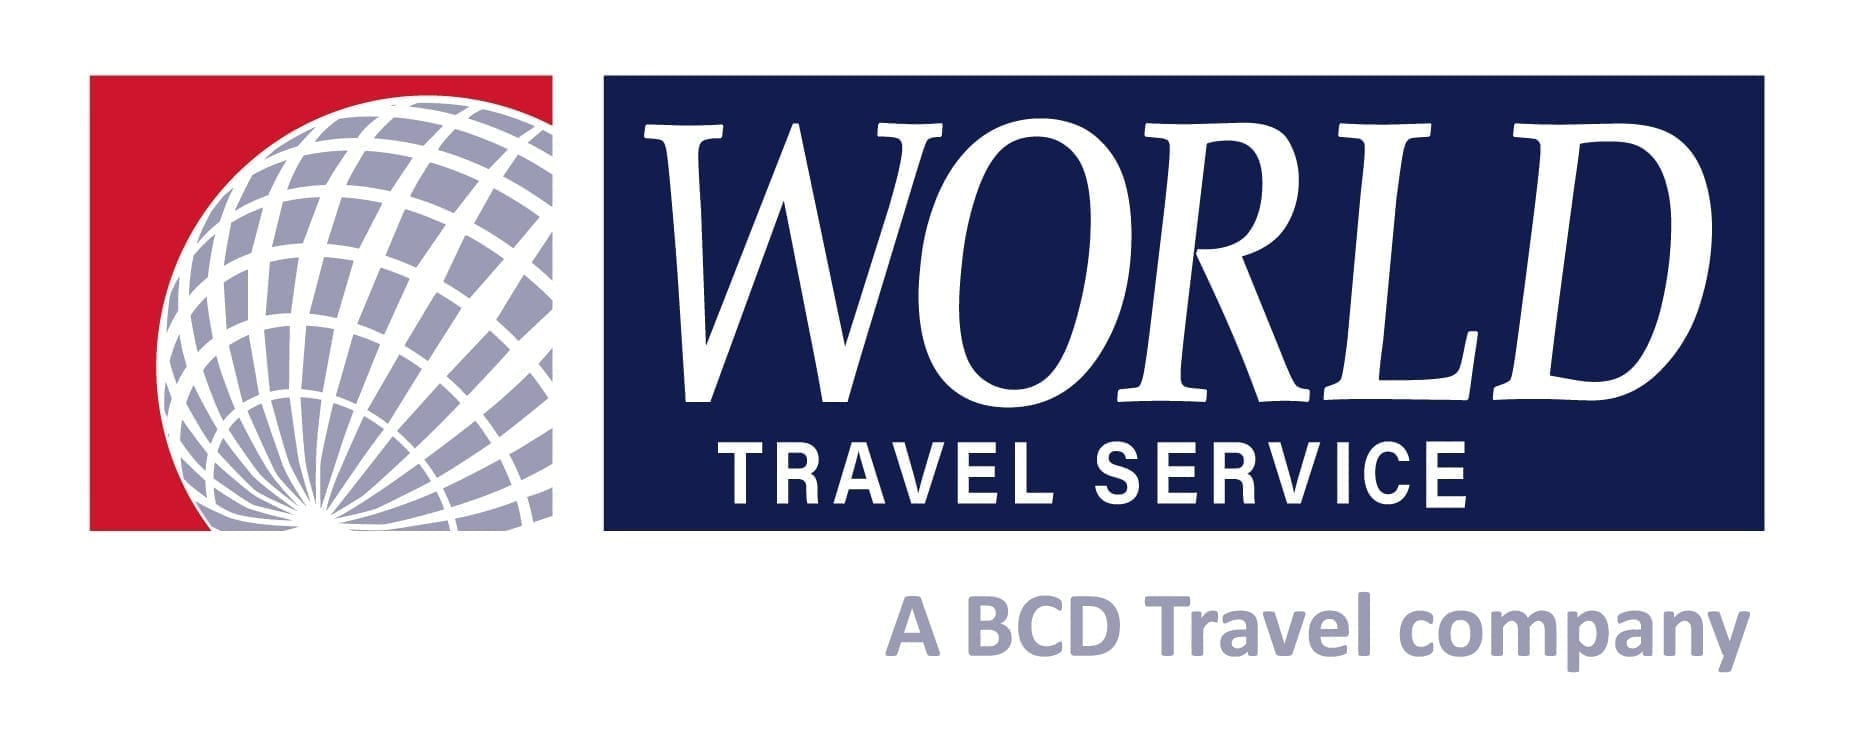 rb world travel services